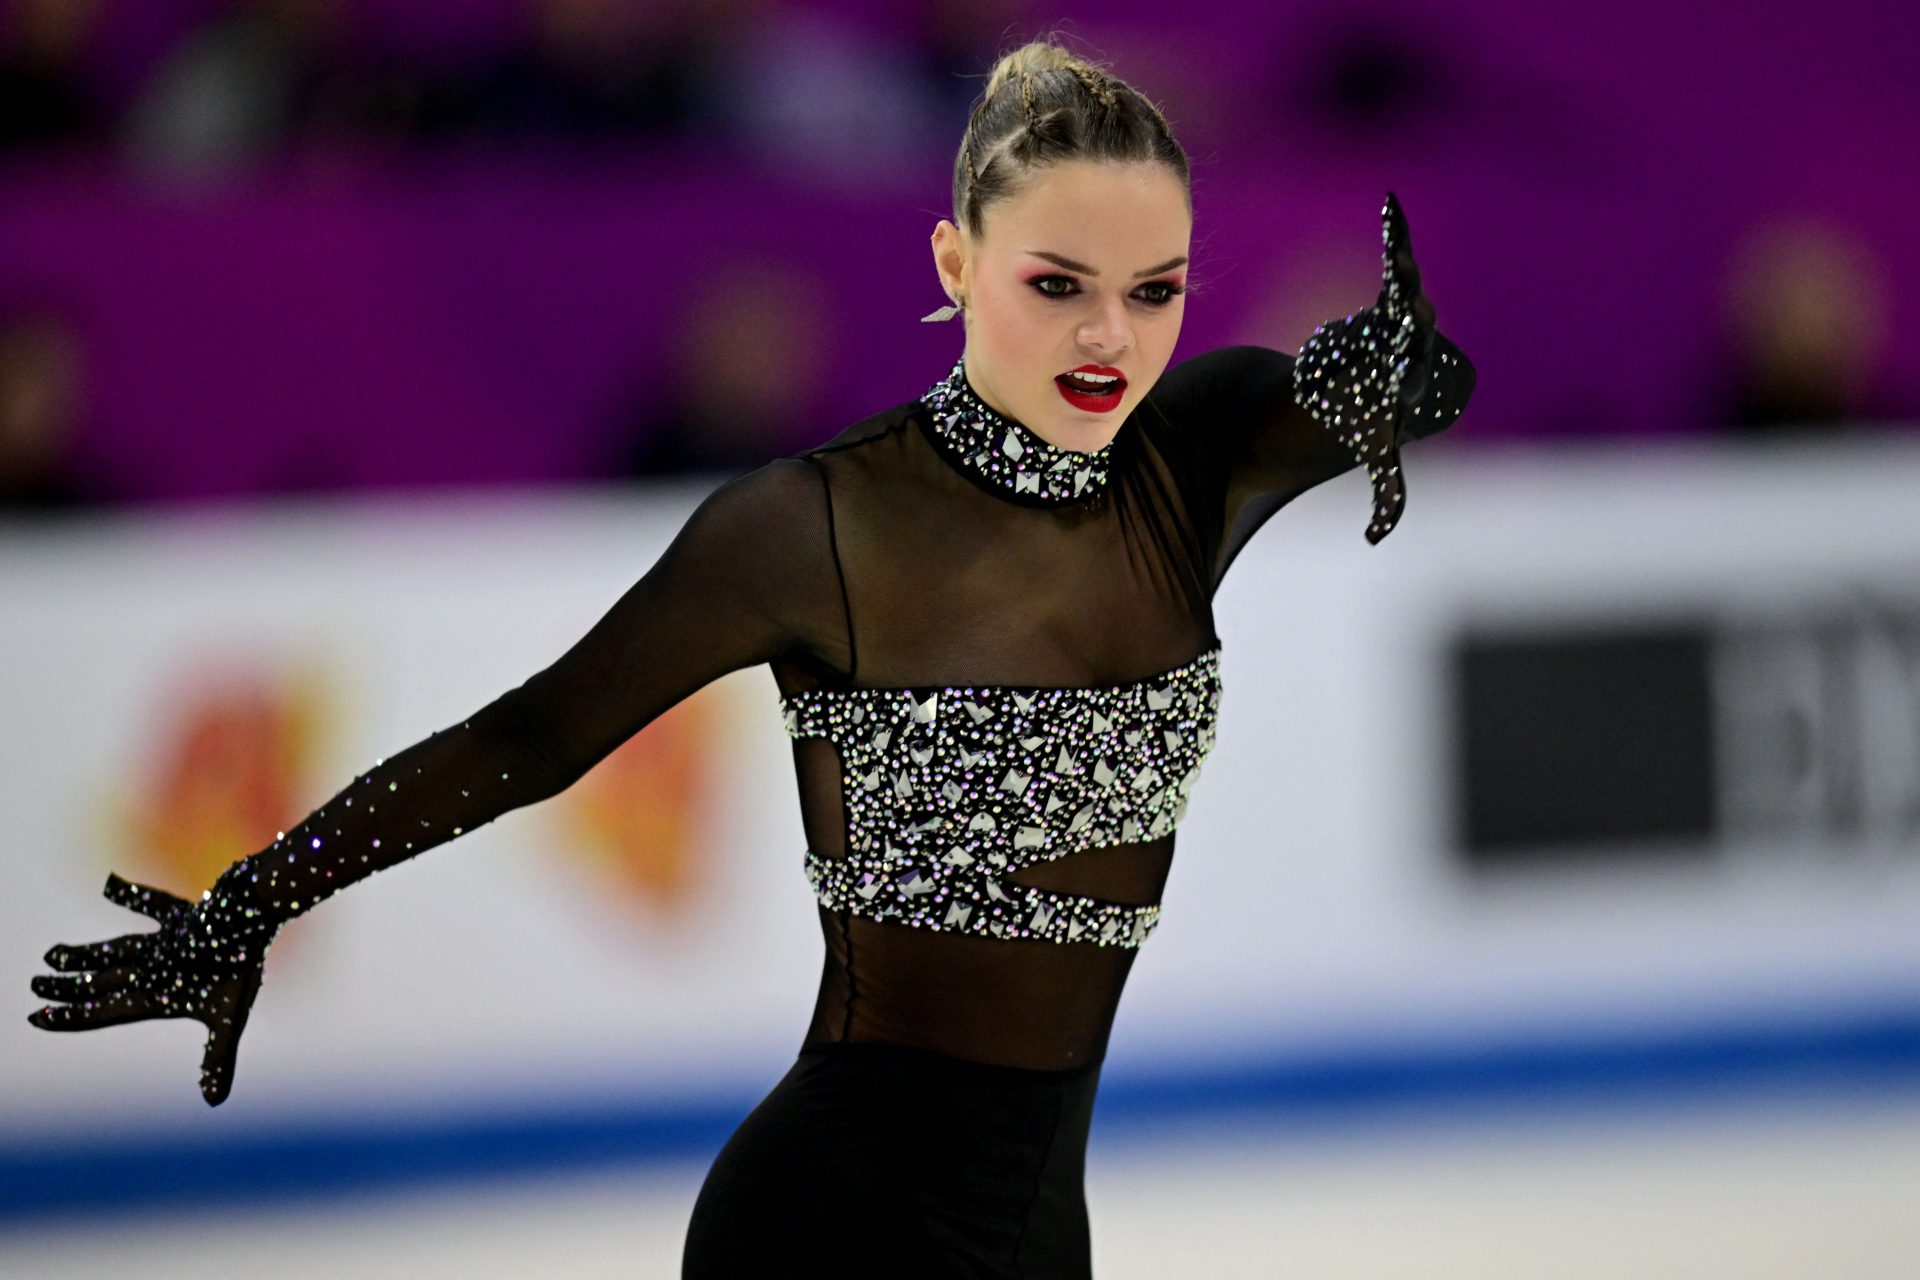 Loena Hendrickx, Belgium's figure skating queen who just missed out on